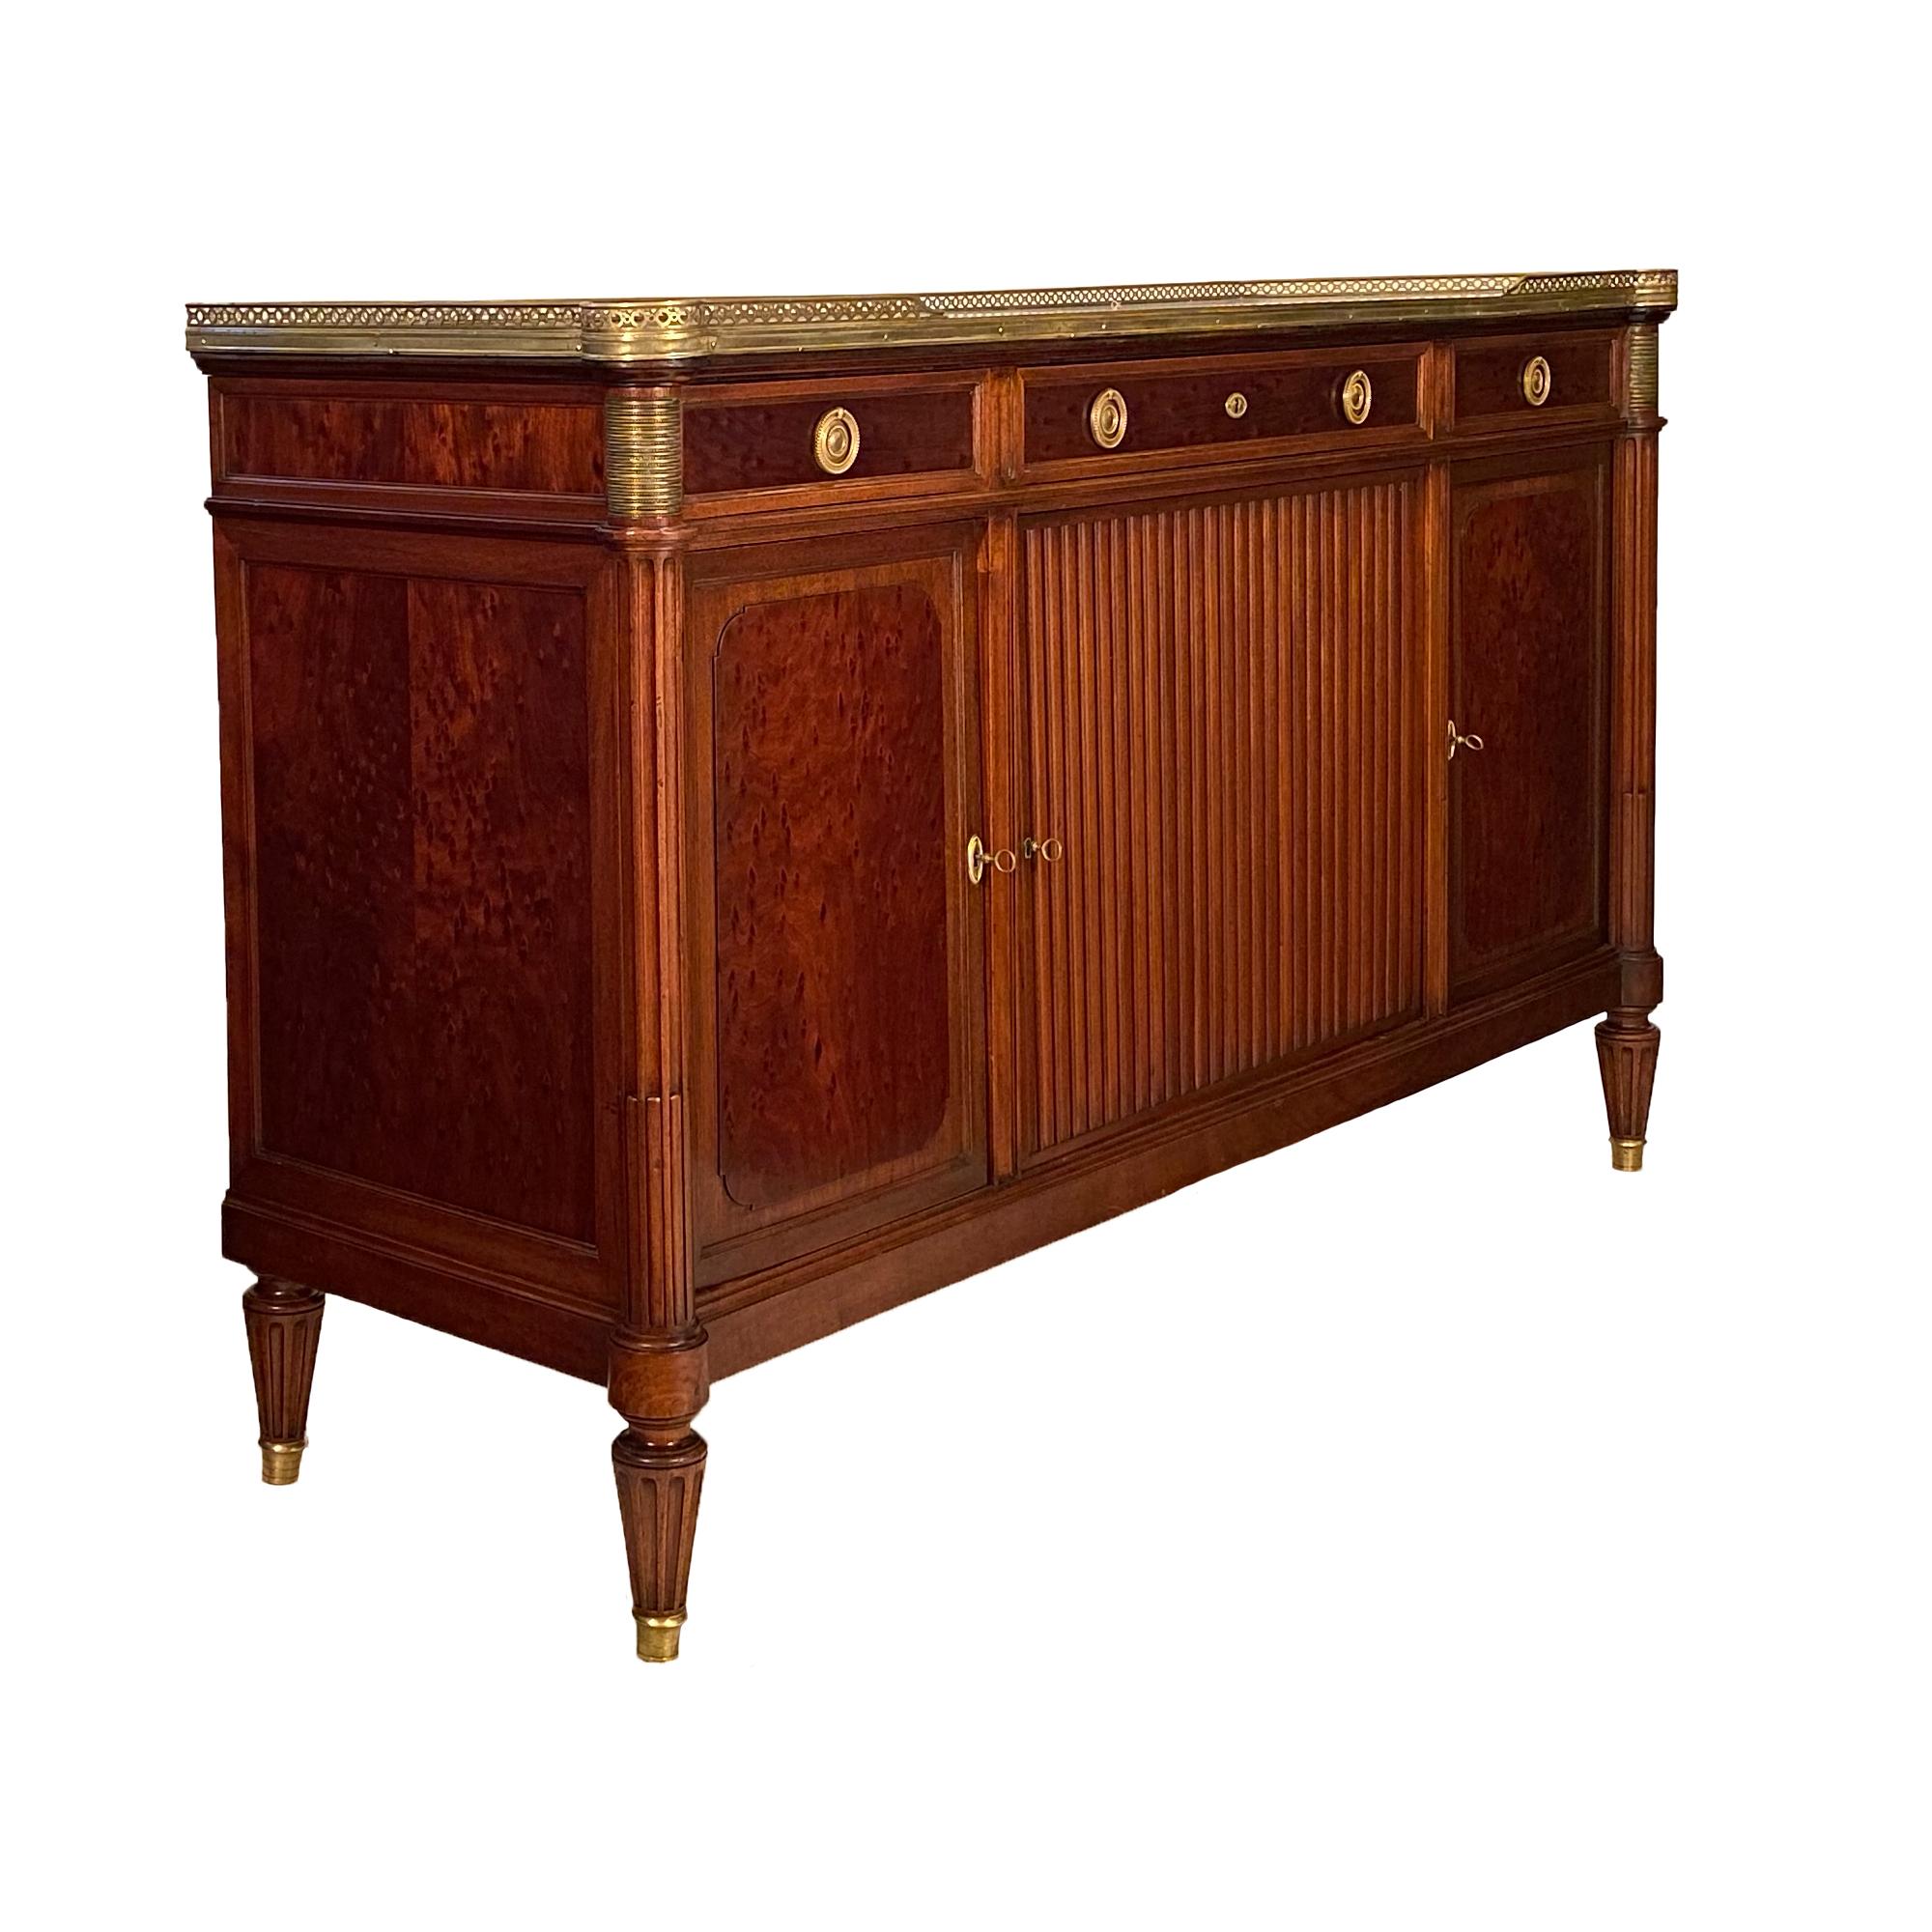 French Louis XVI style mahogany buffet. This piece is made of solid mahogany and speckled mahogany. The classic credenza opens up with three doors to ample adjustable shelving. The enfilade also features three dovetailed drawers, finely cast brass